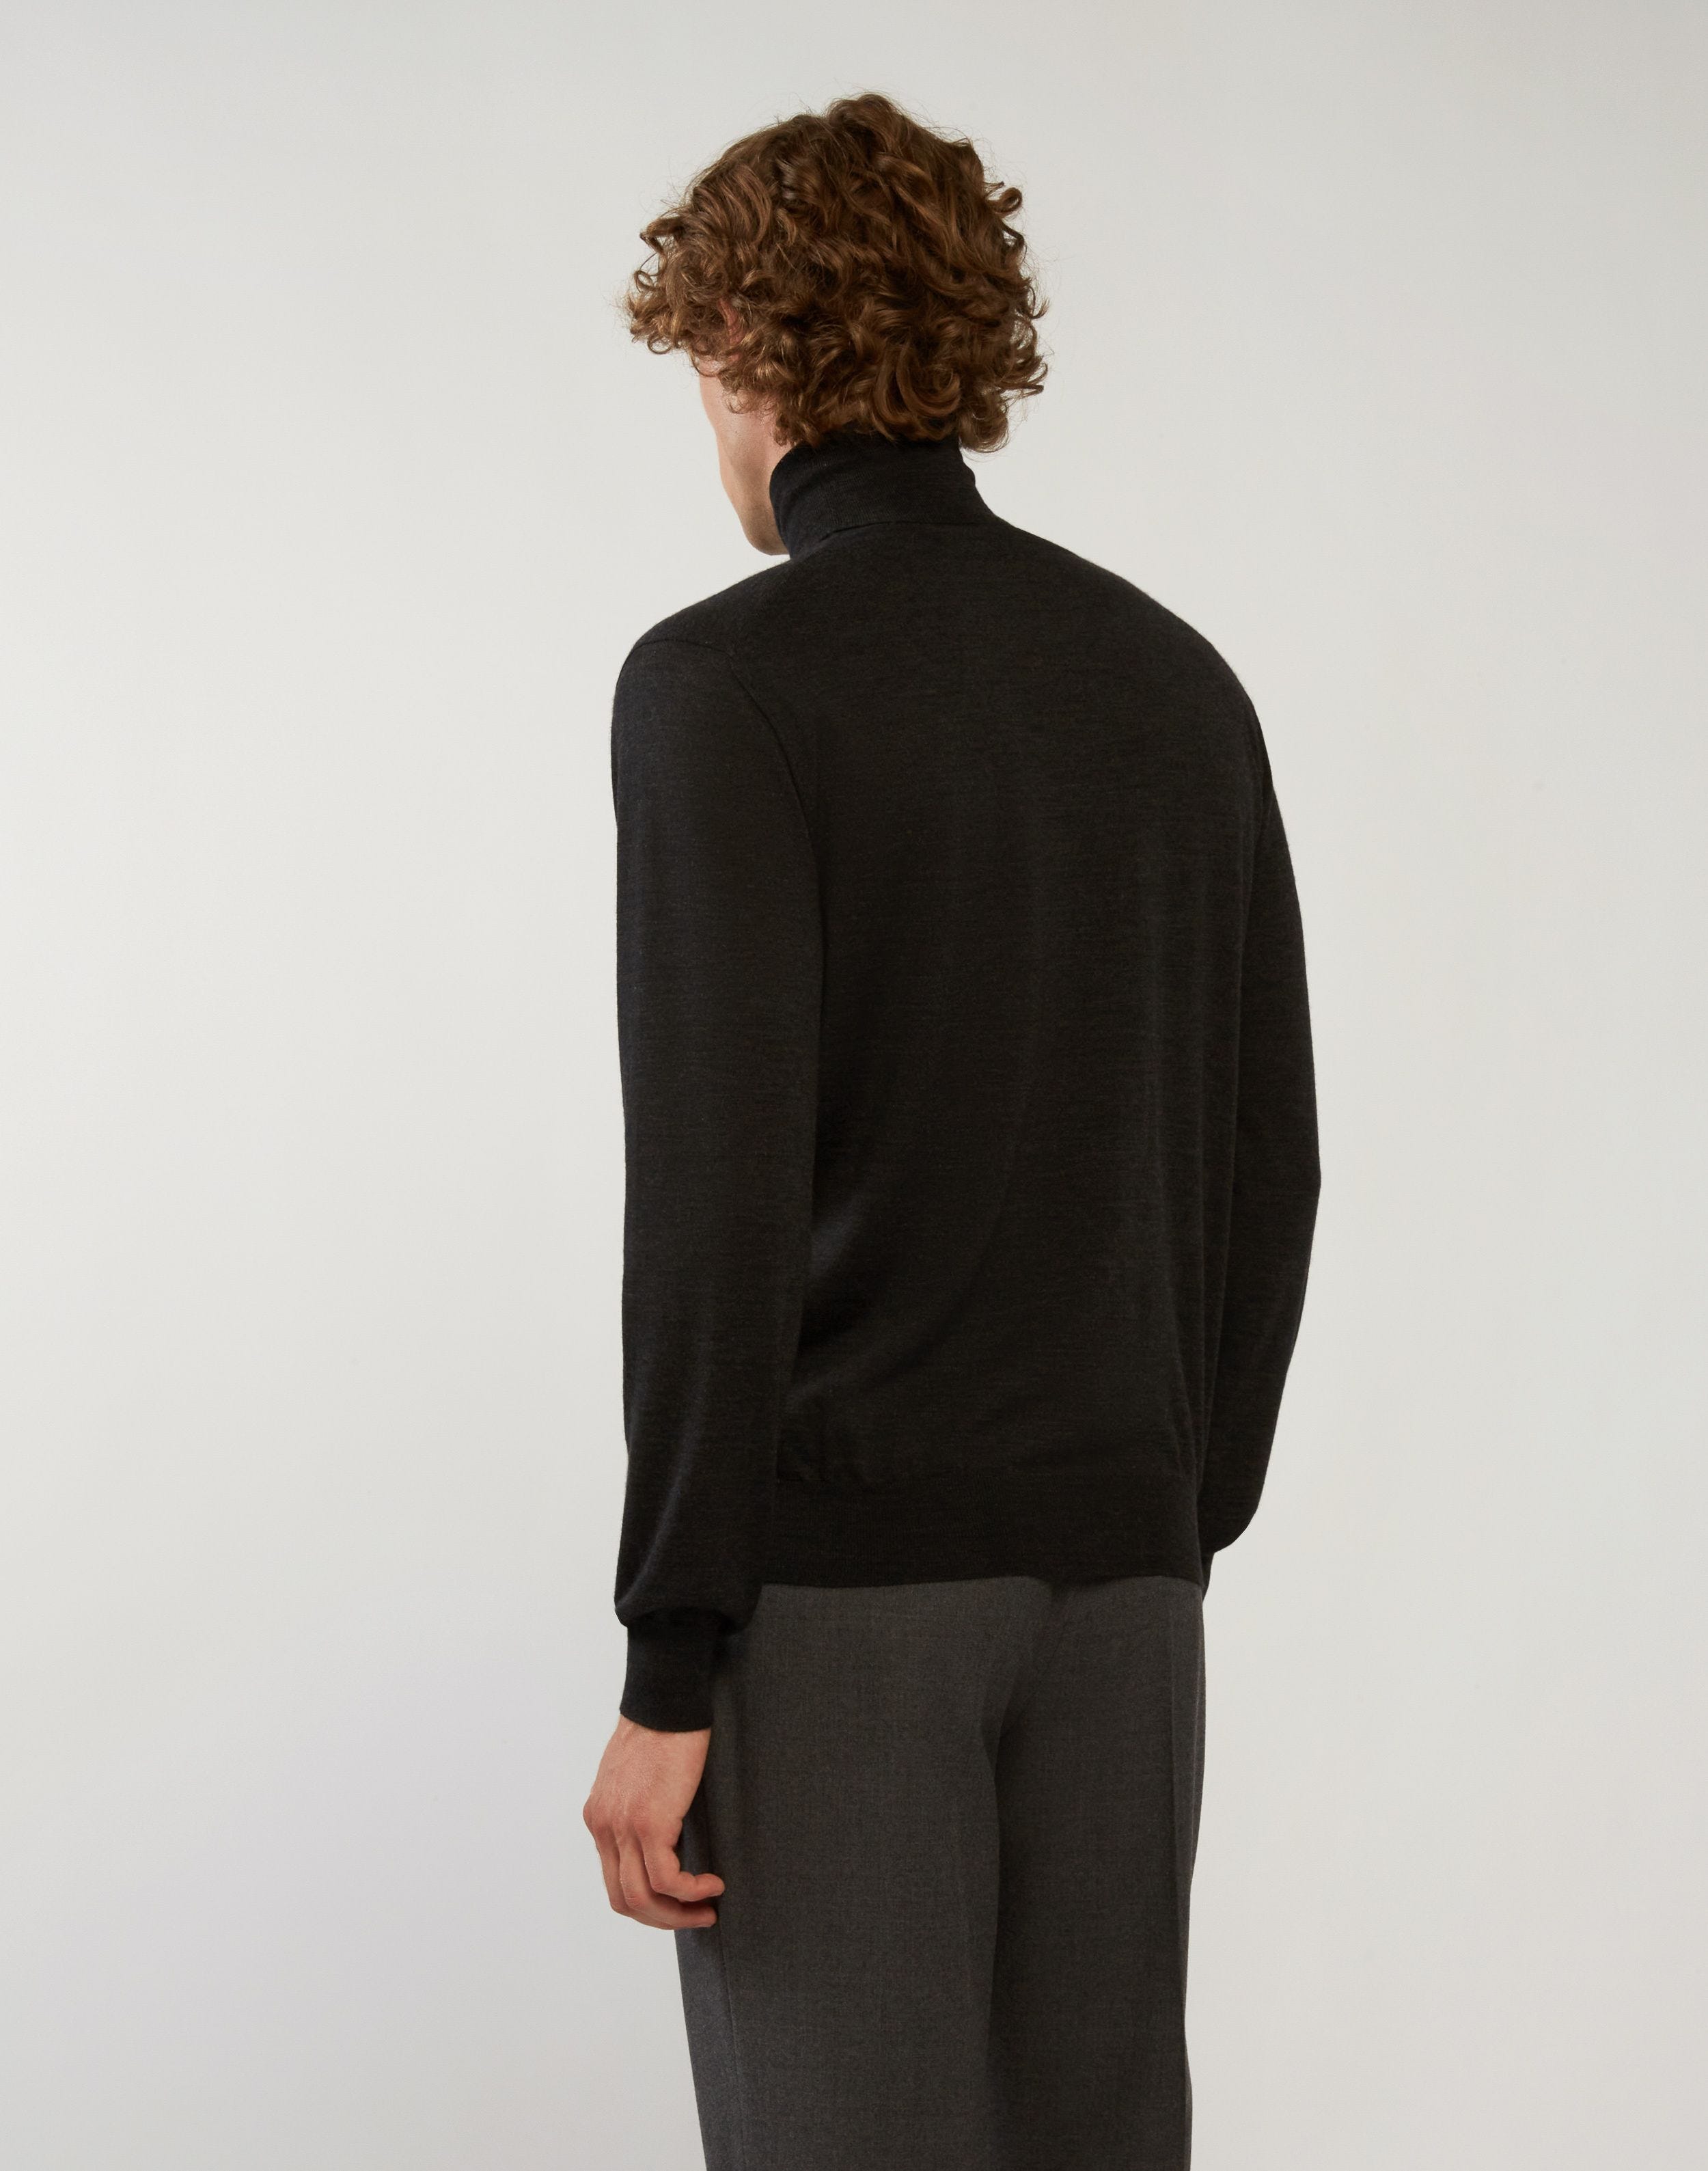 Long-sleeve turtleneck in grey cashmere and silk